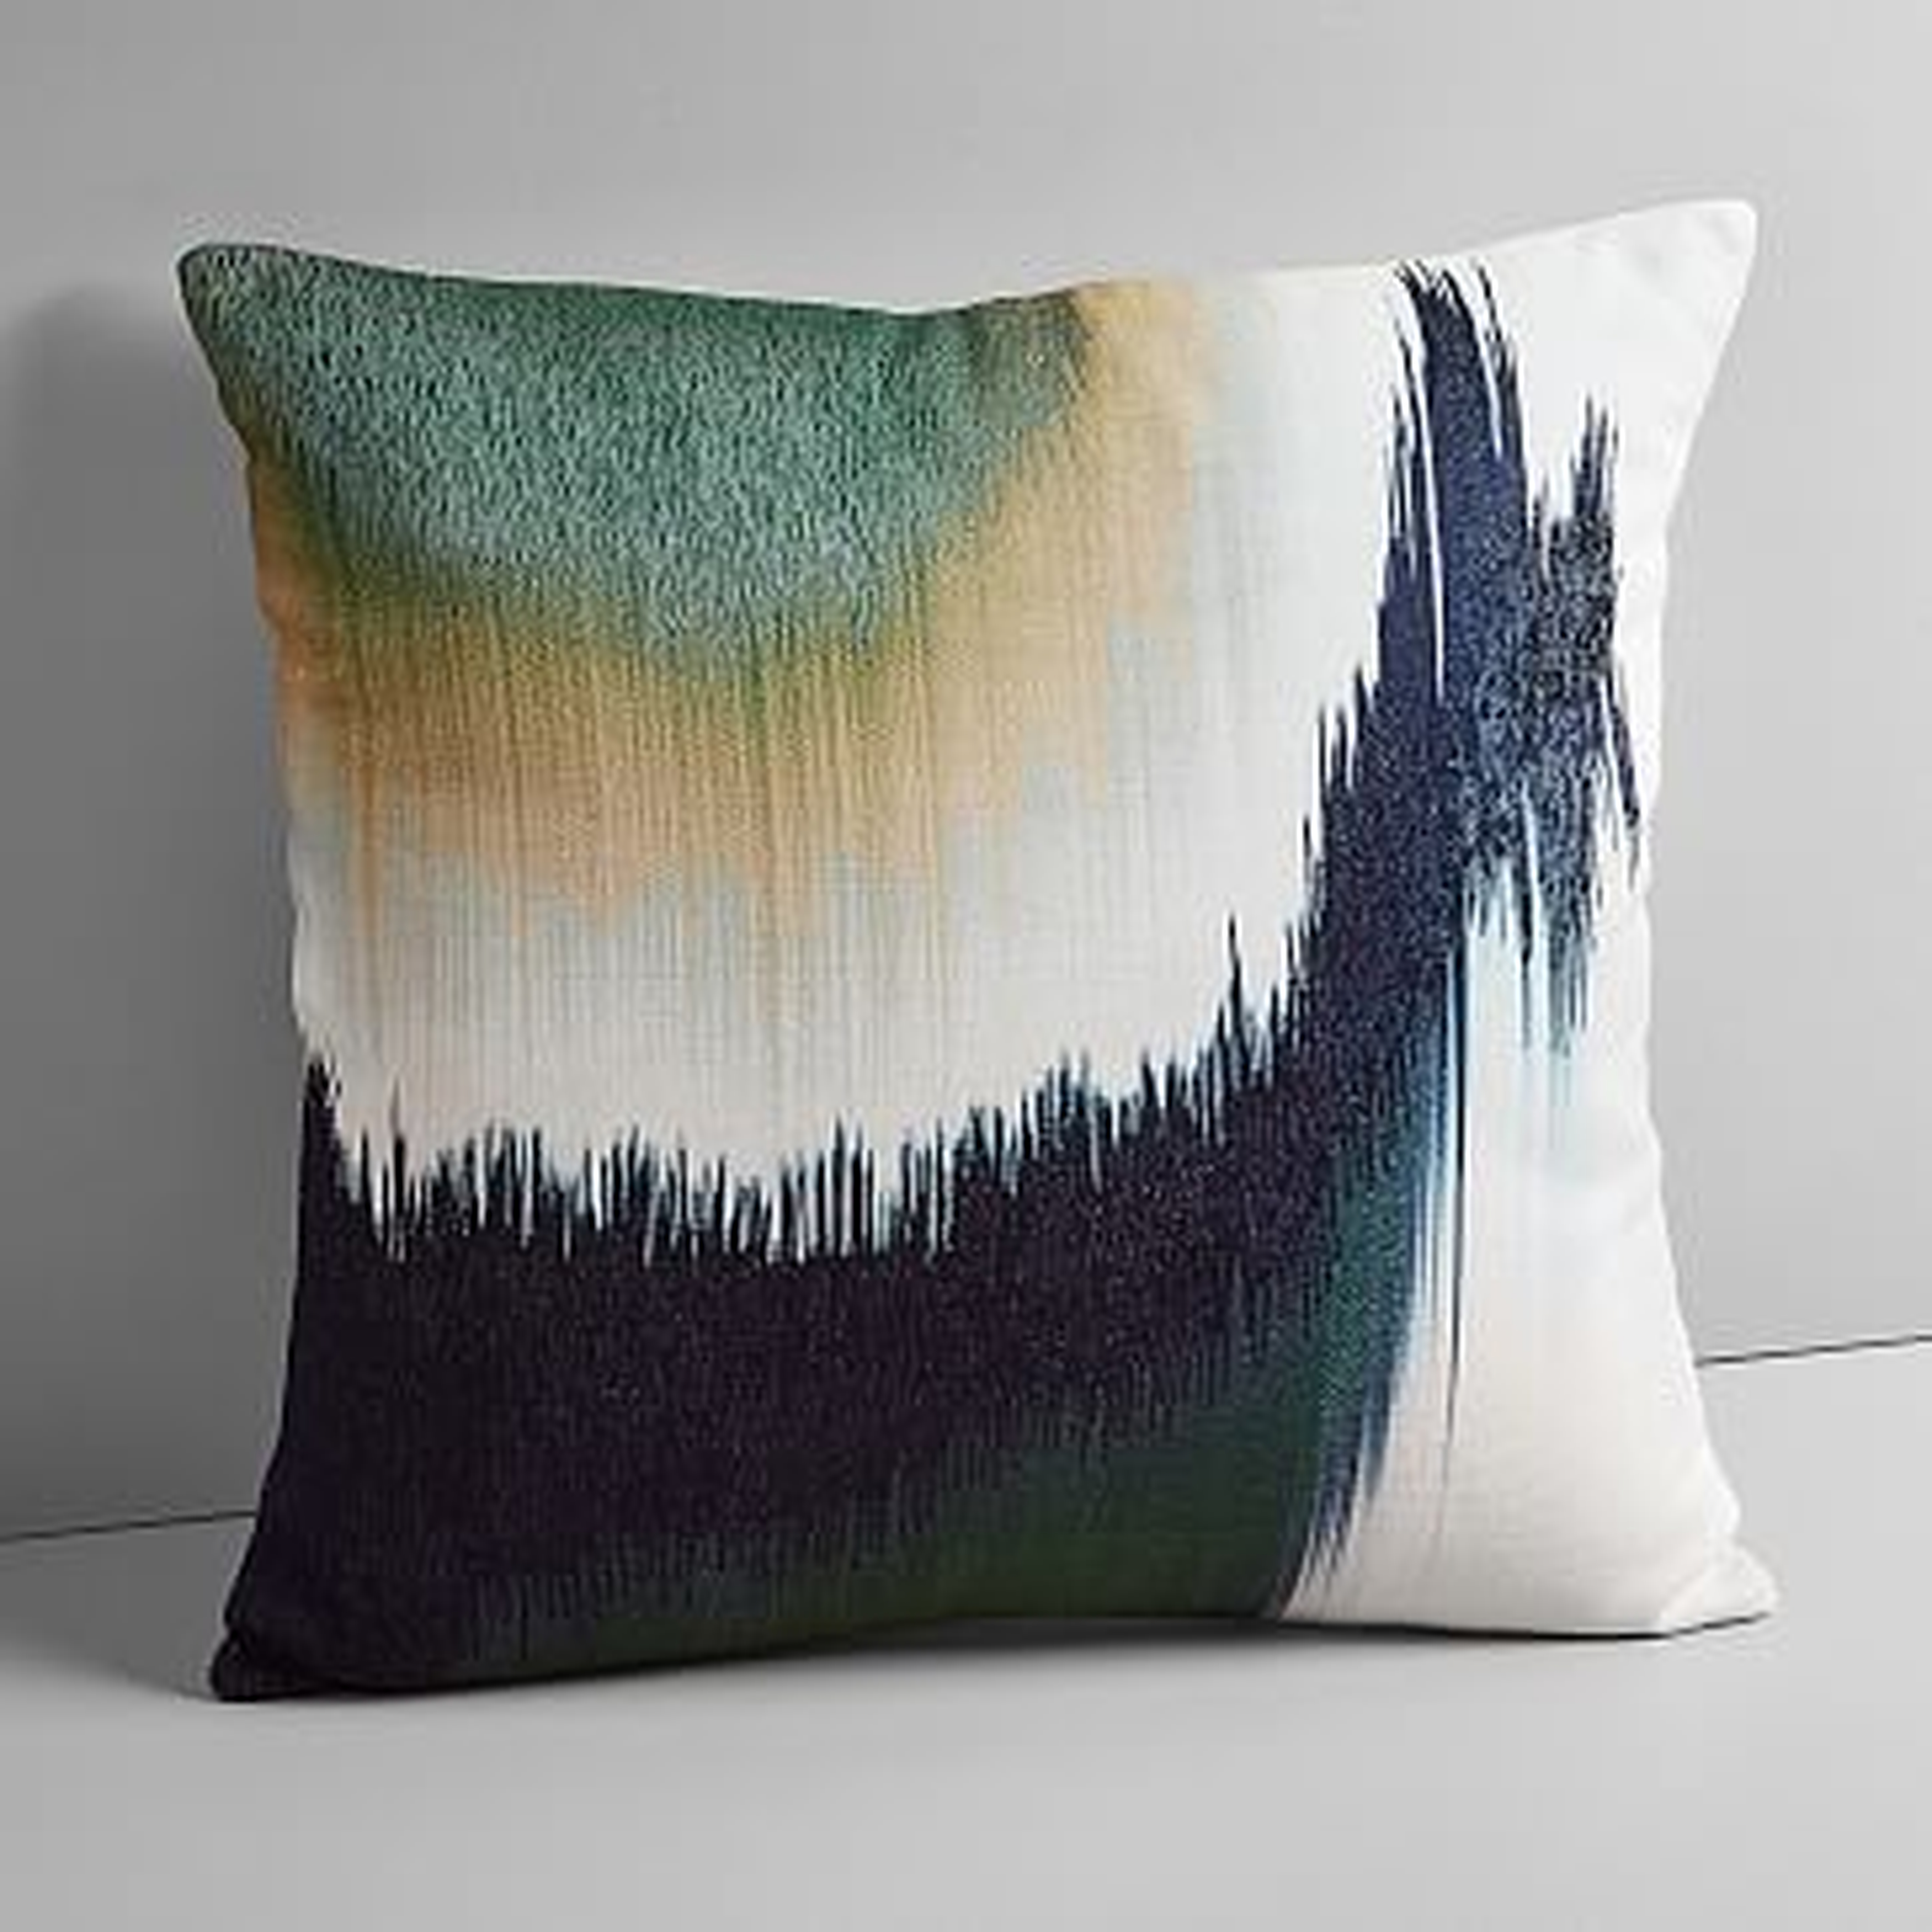 Embroidered Abstract Ikat Pillow Cover, Midnight, 20"x20" - West Elm